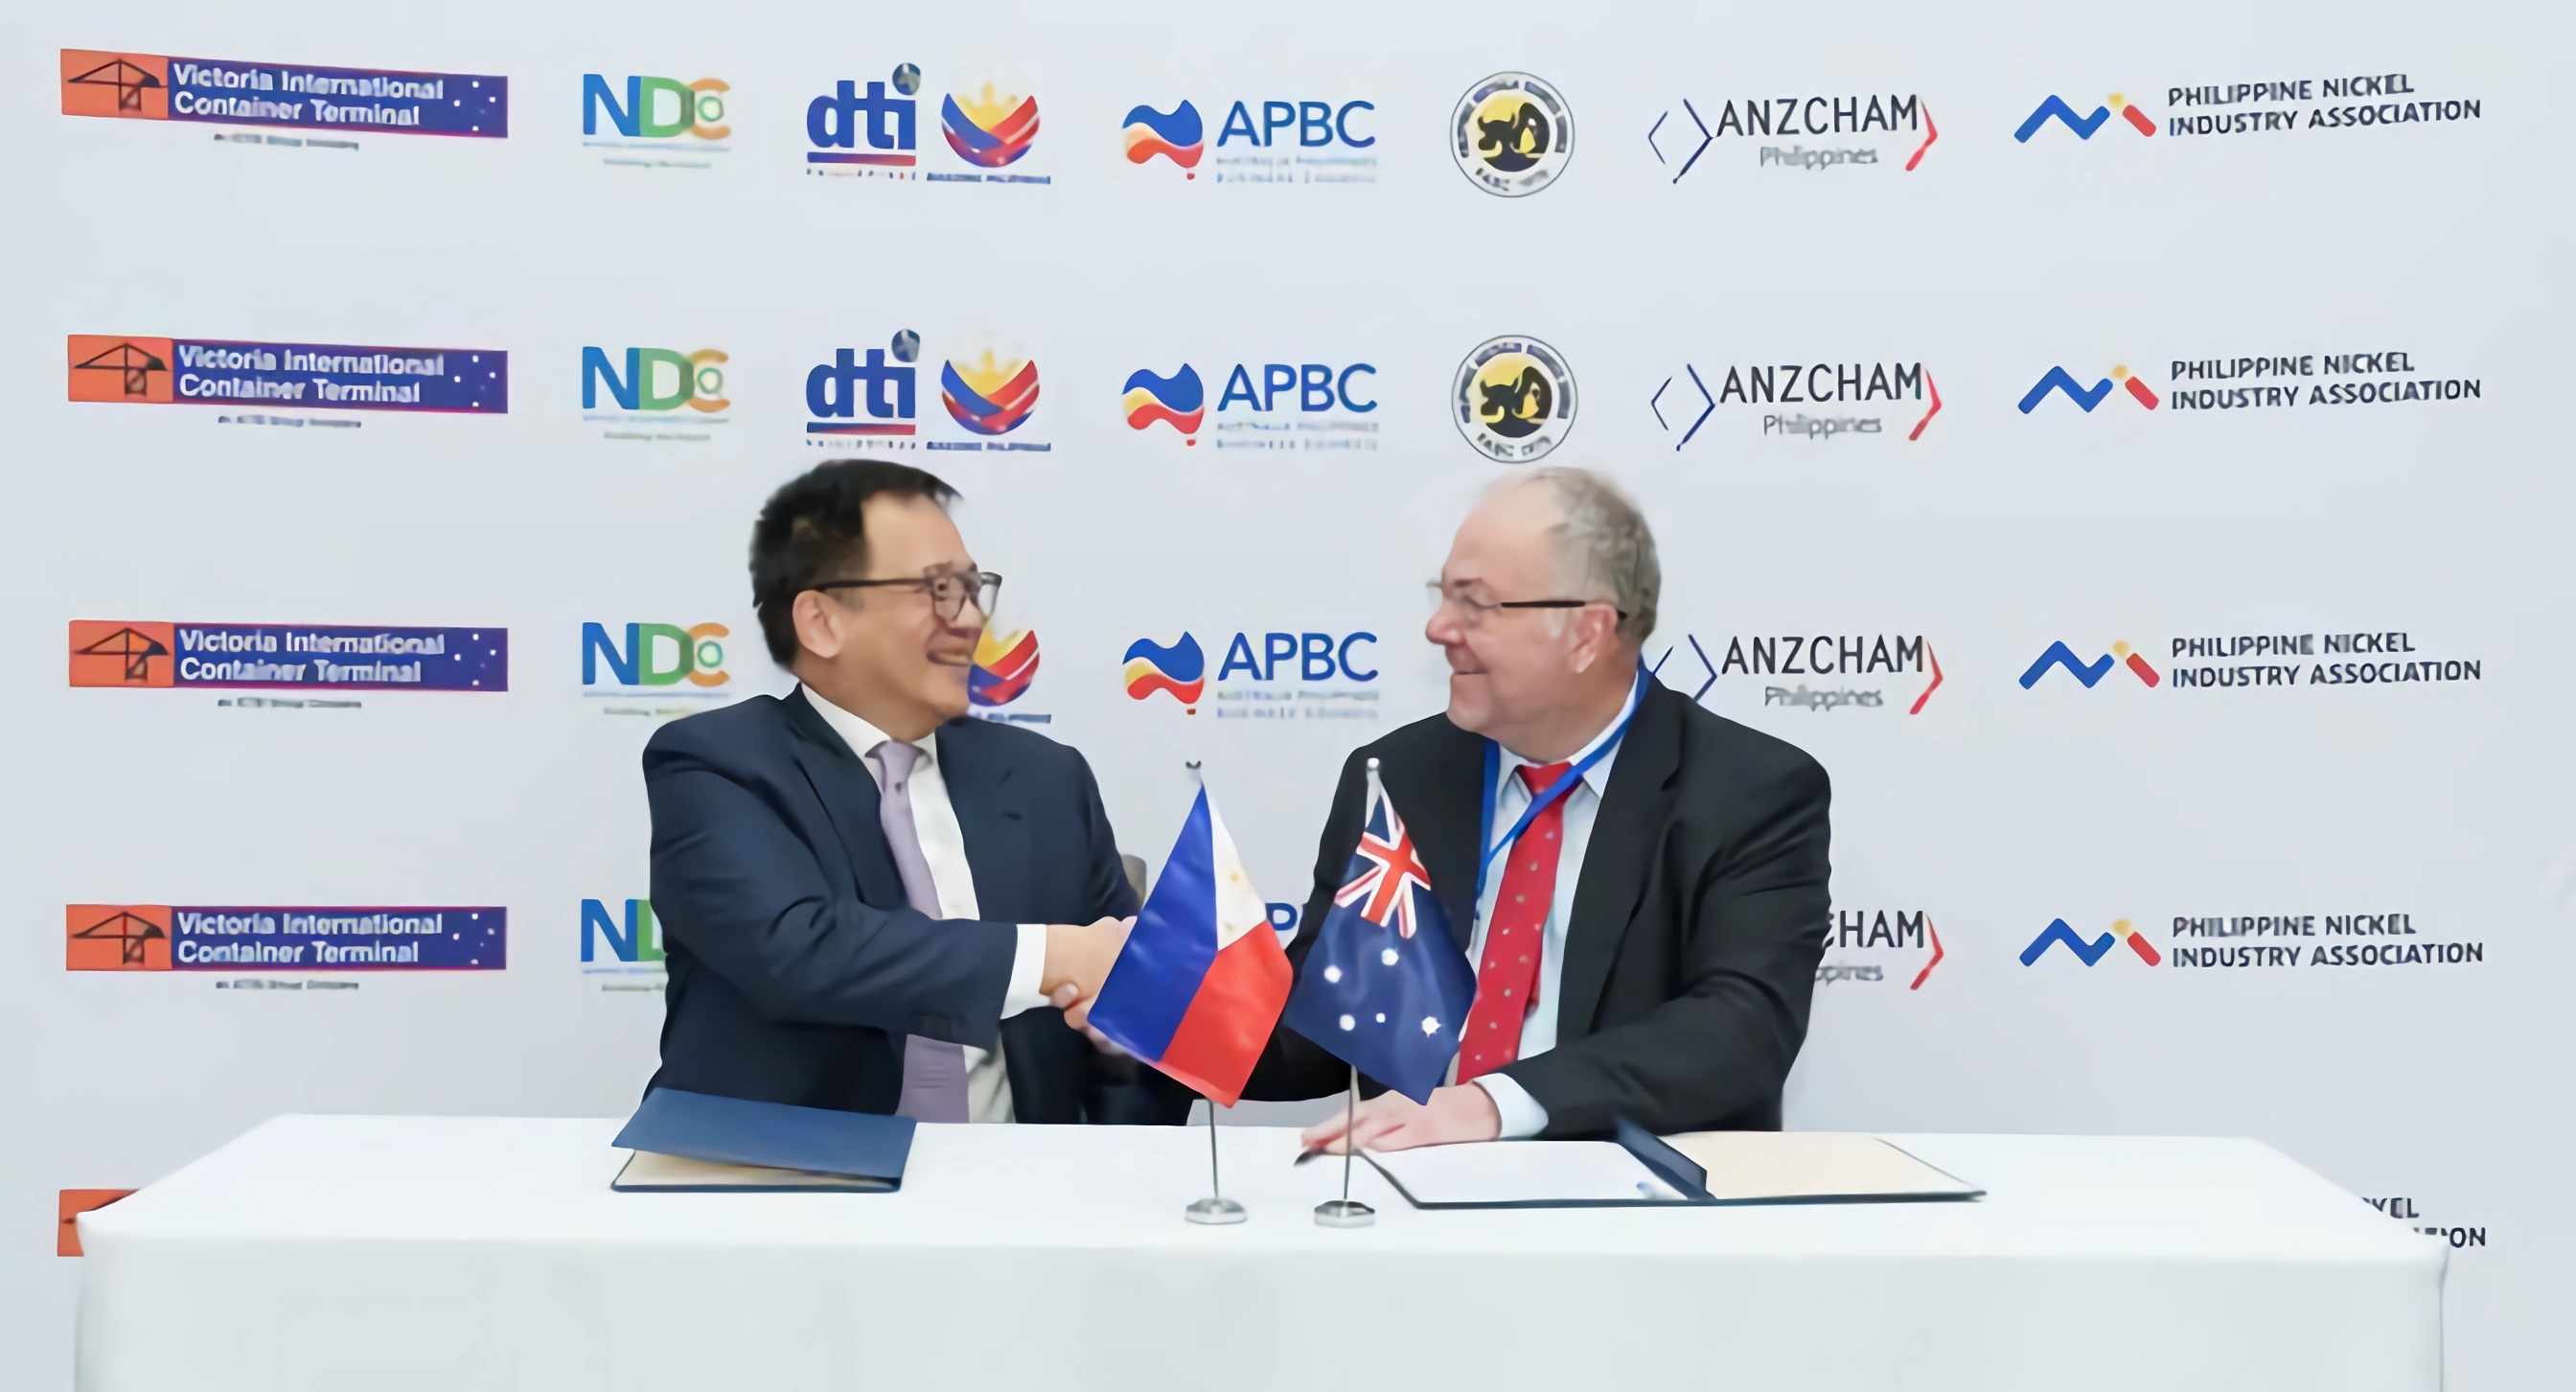 Jerome Tan, president of IMI and Donovan Casey, founder and CEO of RRR Manufacturing PTY Ltd., shake hands to formalize the agreement.